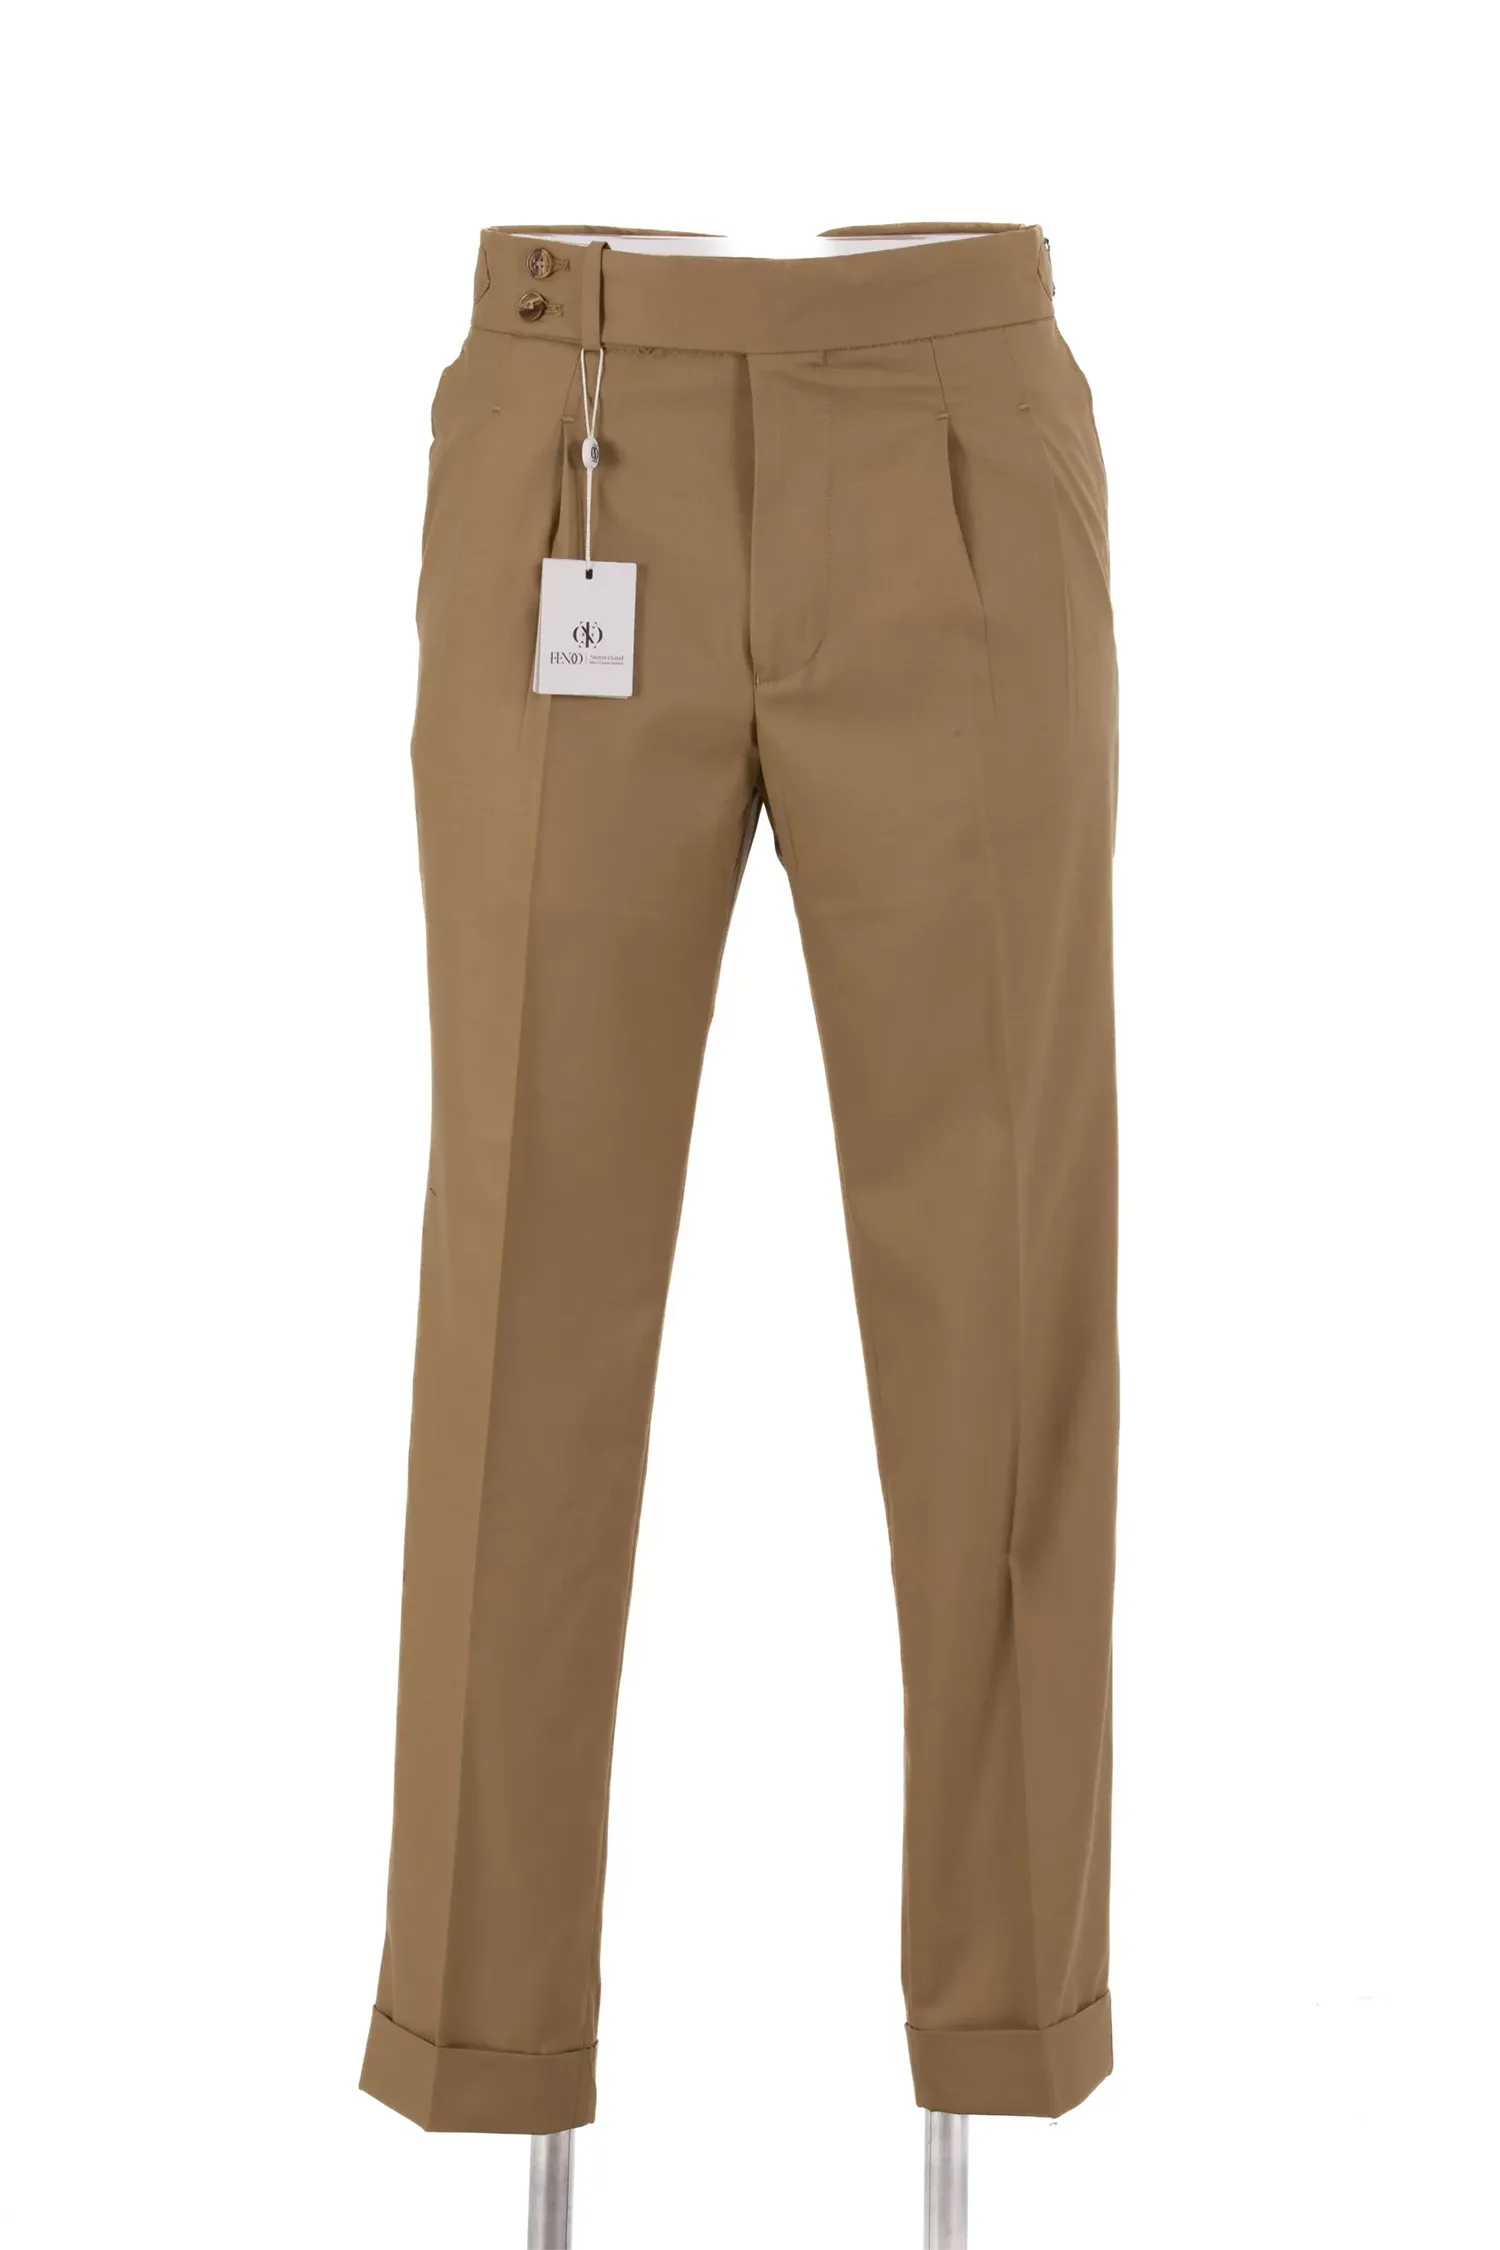 NAPLES Light Brown Italian Style Trousers